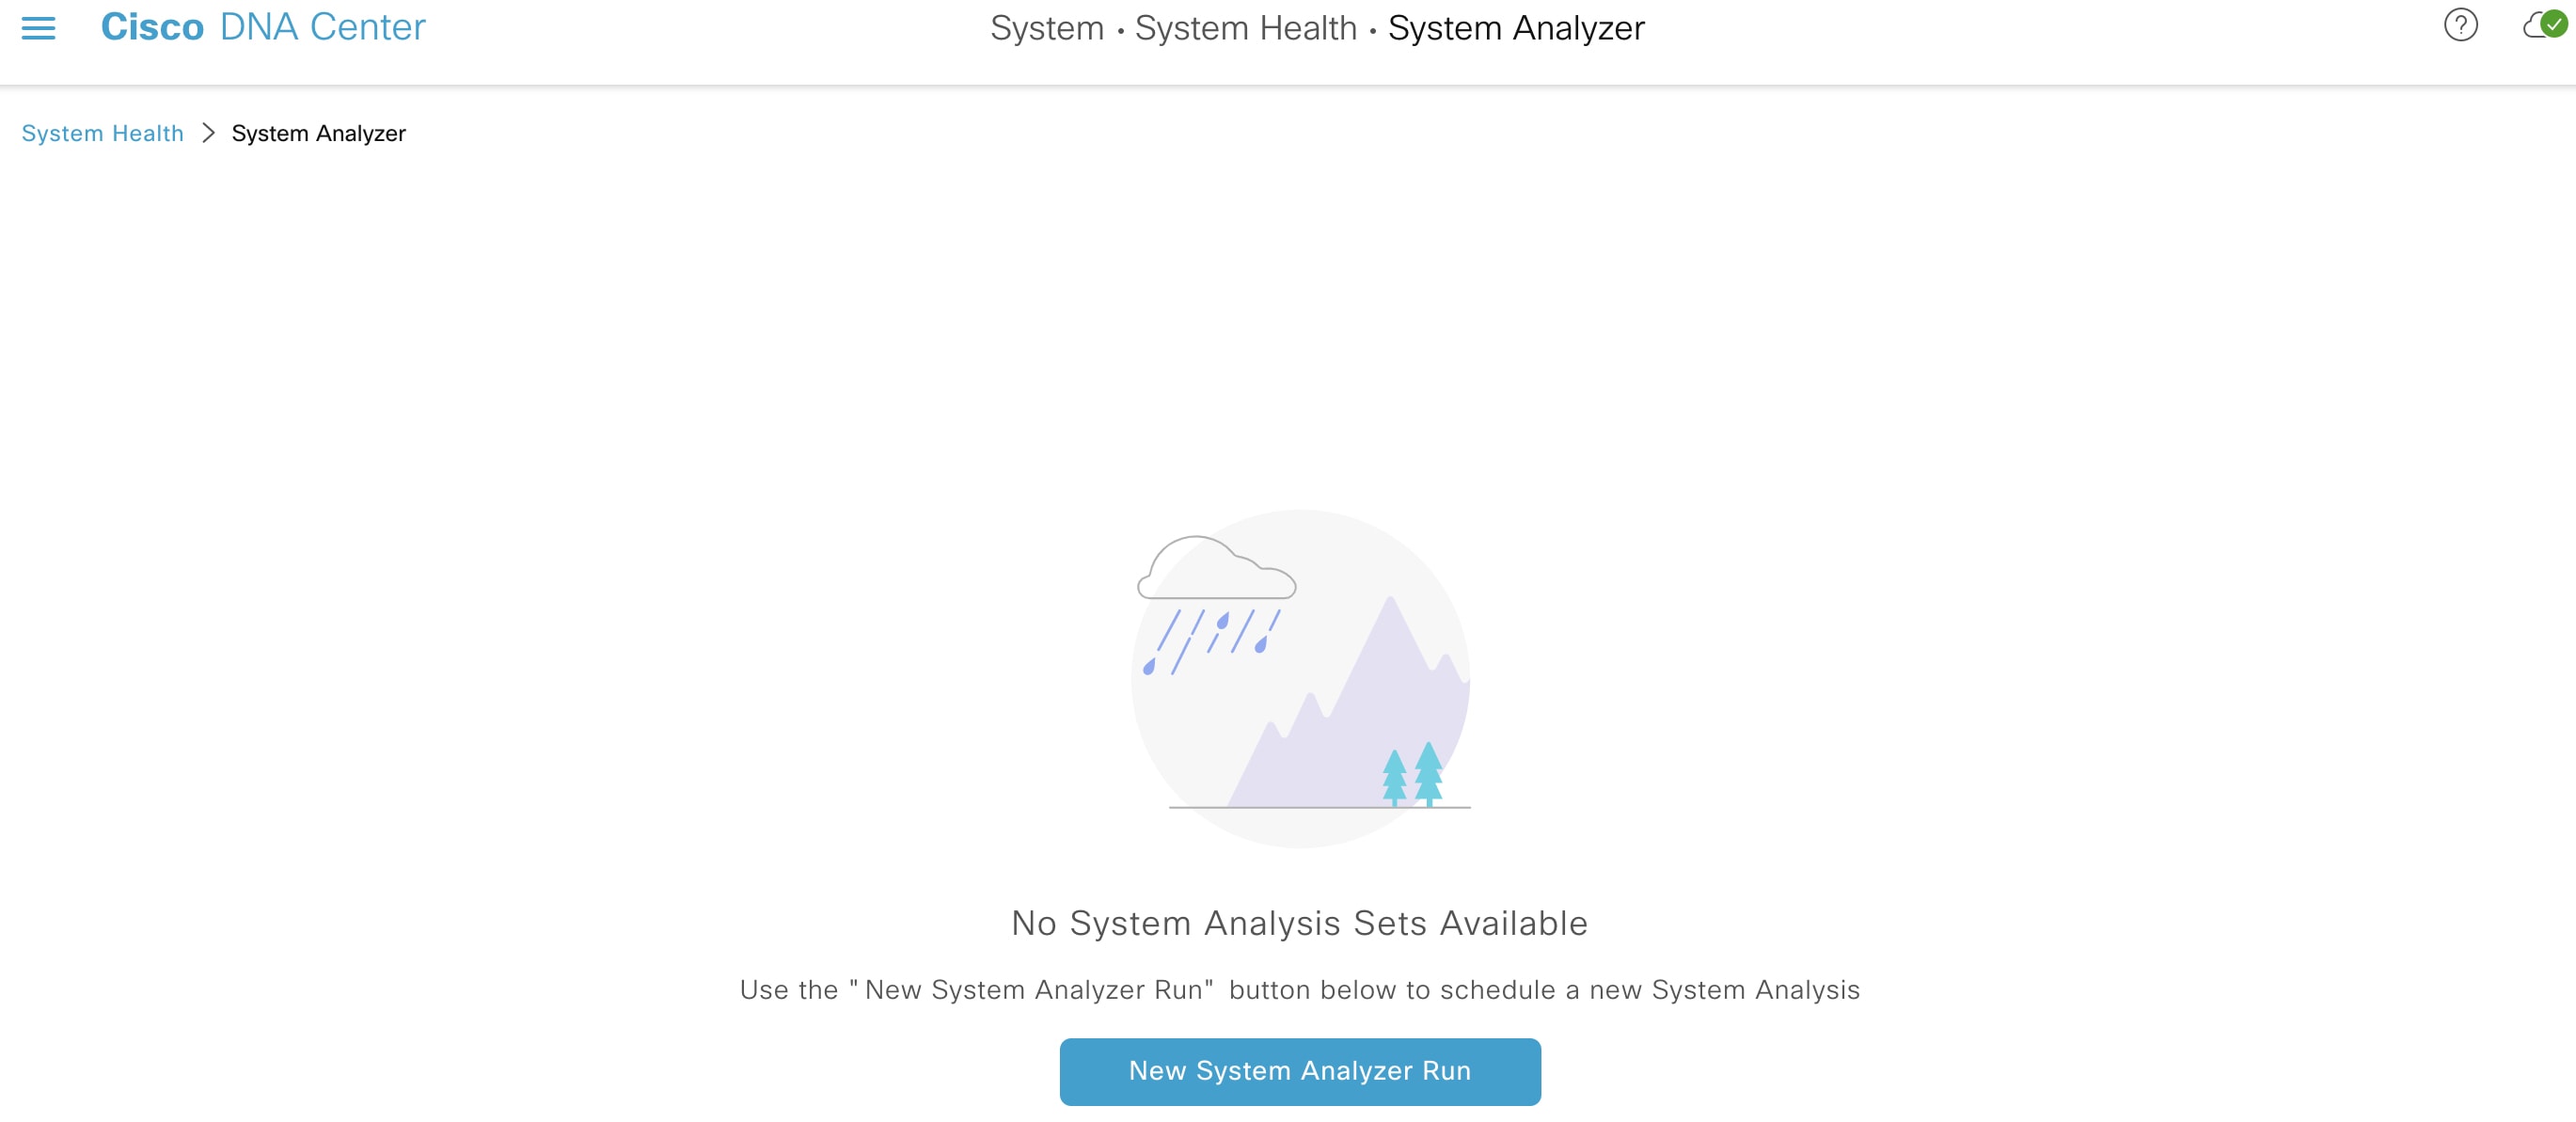 System Analyzer page when there is no information about previously completed runs.